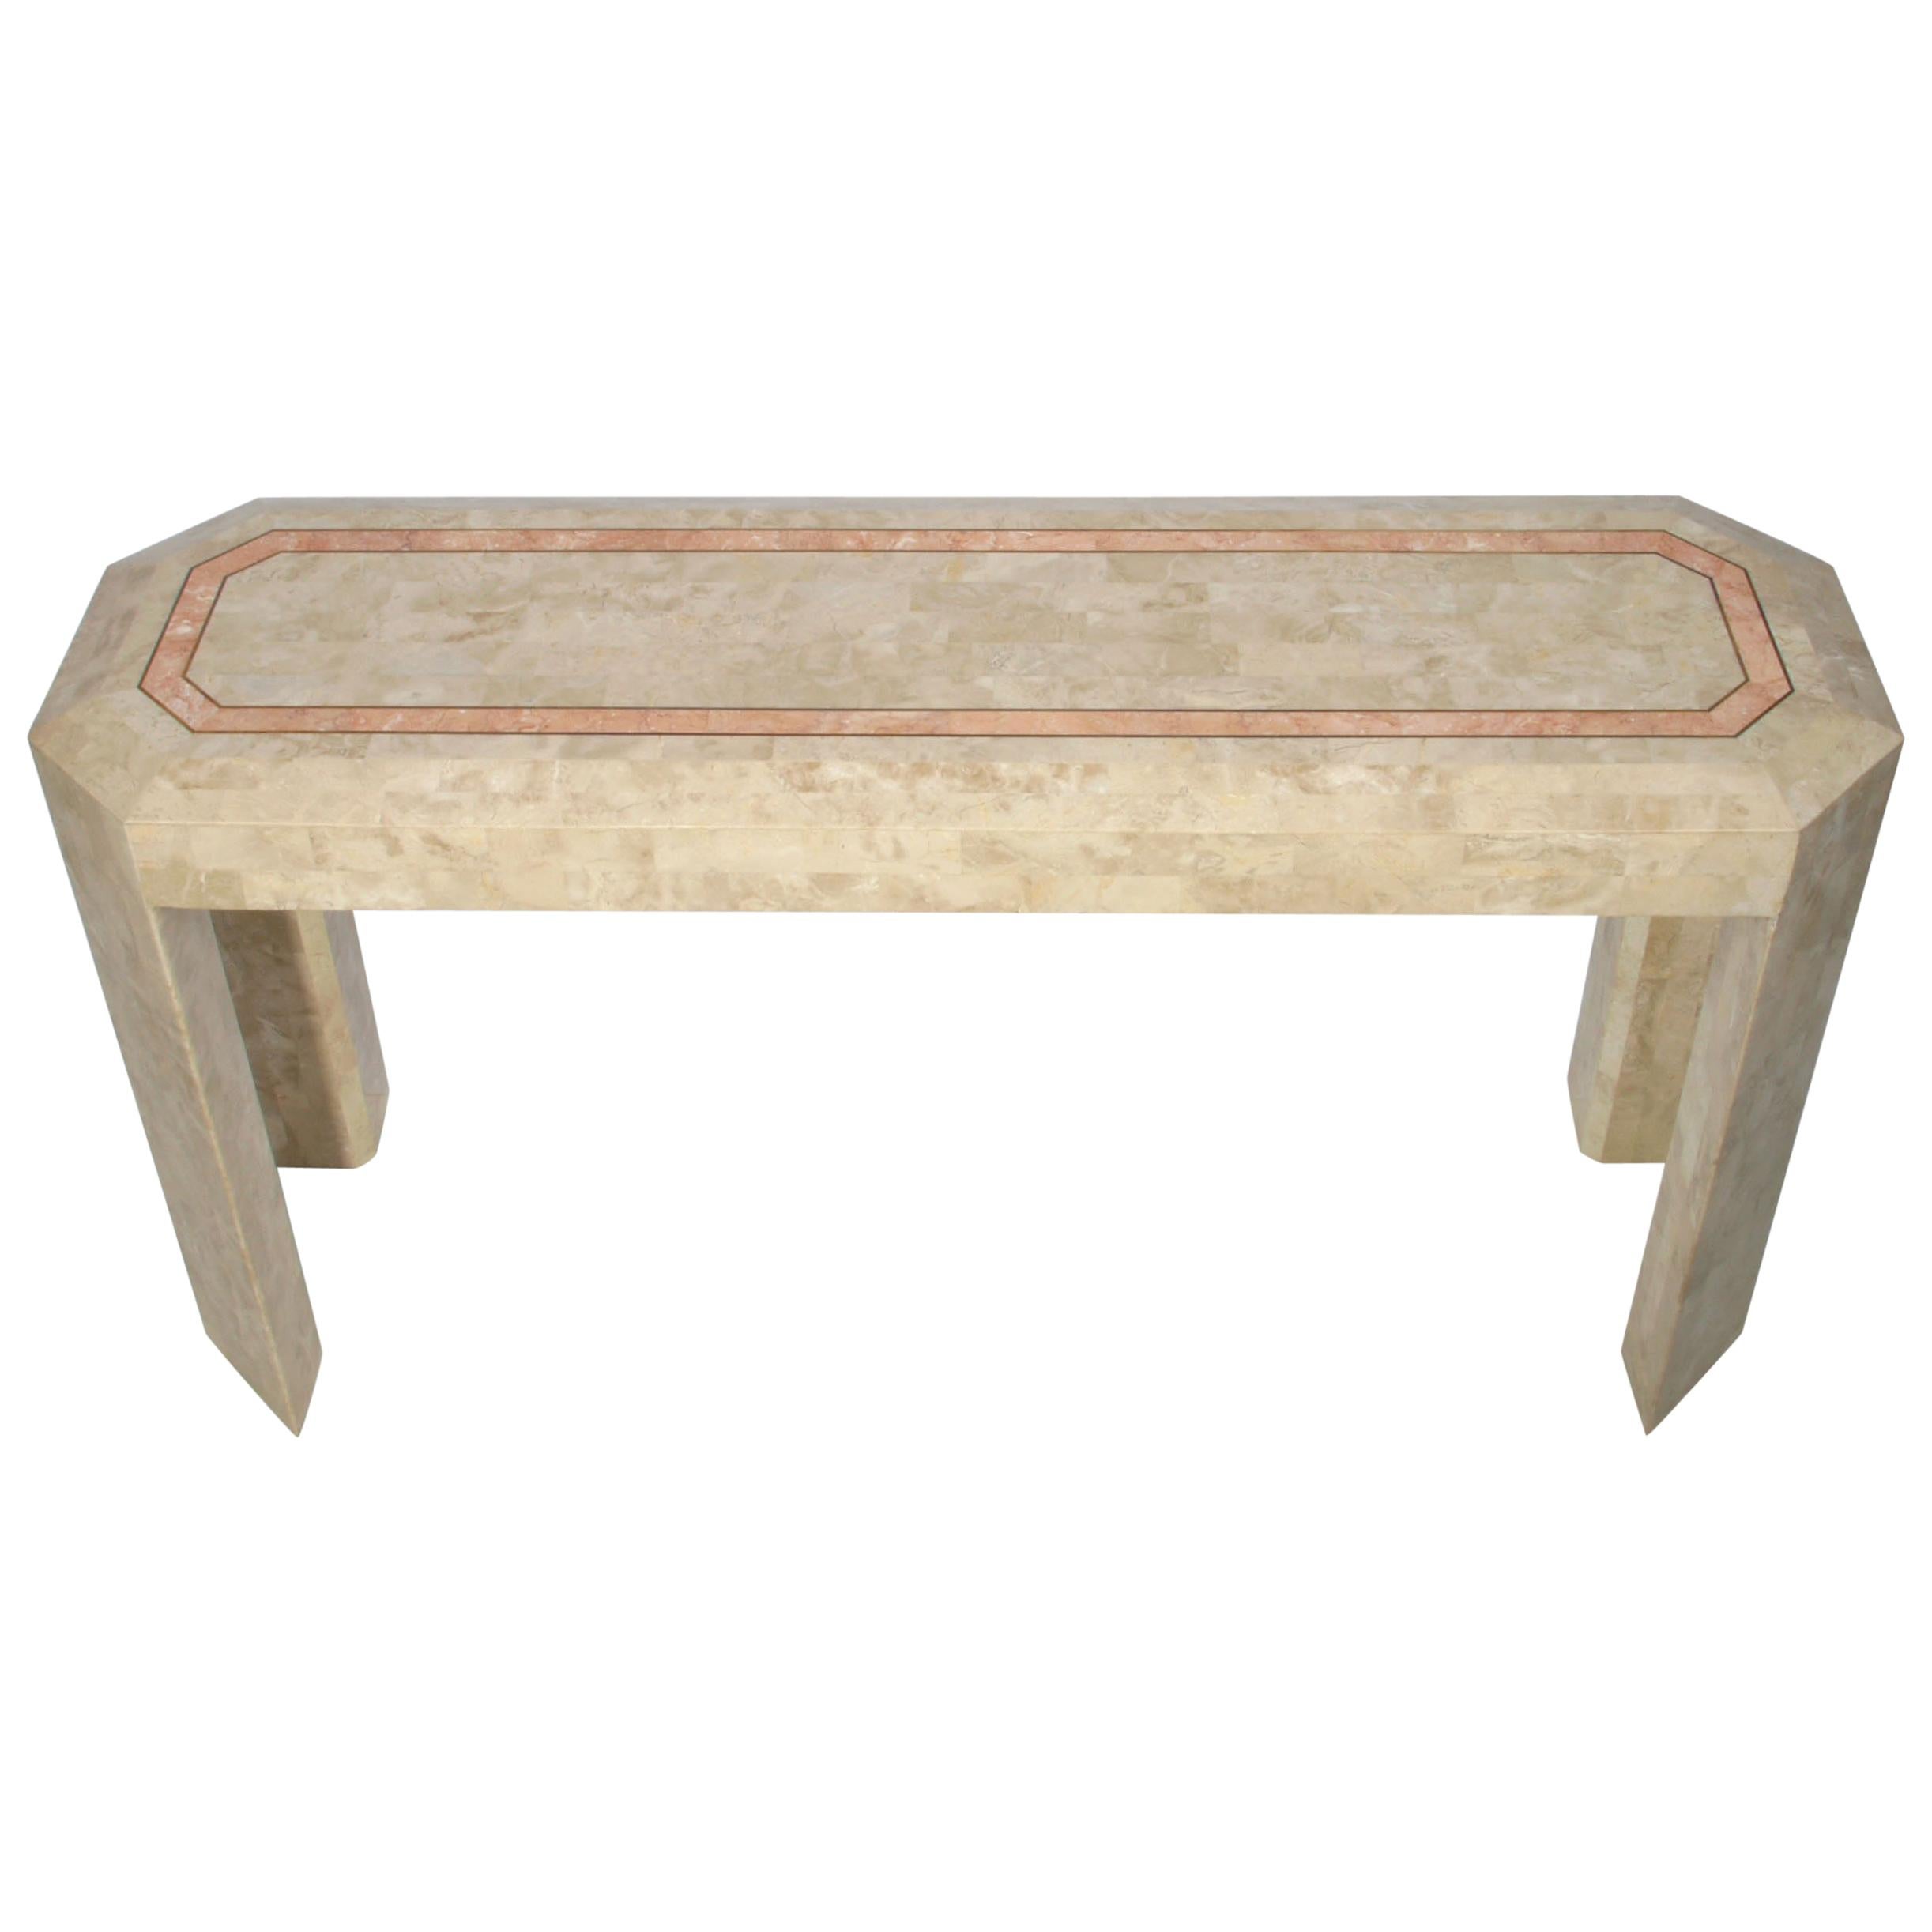 Maitland Smith Attributed Tessellated Stone Console Table with Brass Trim